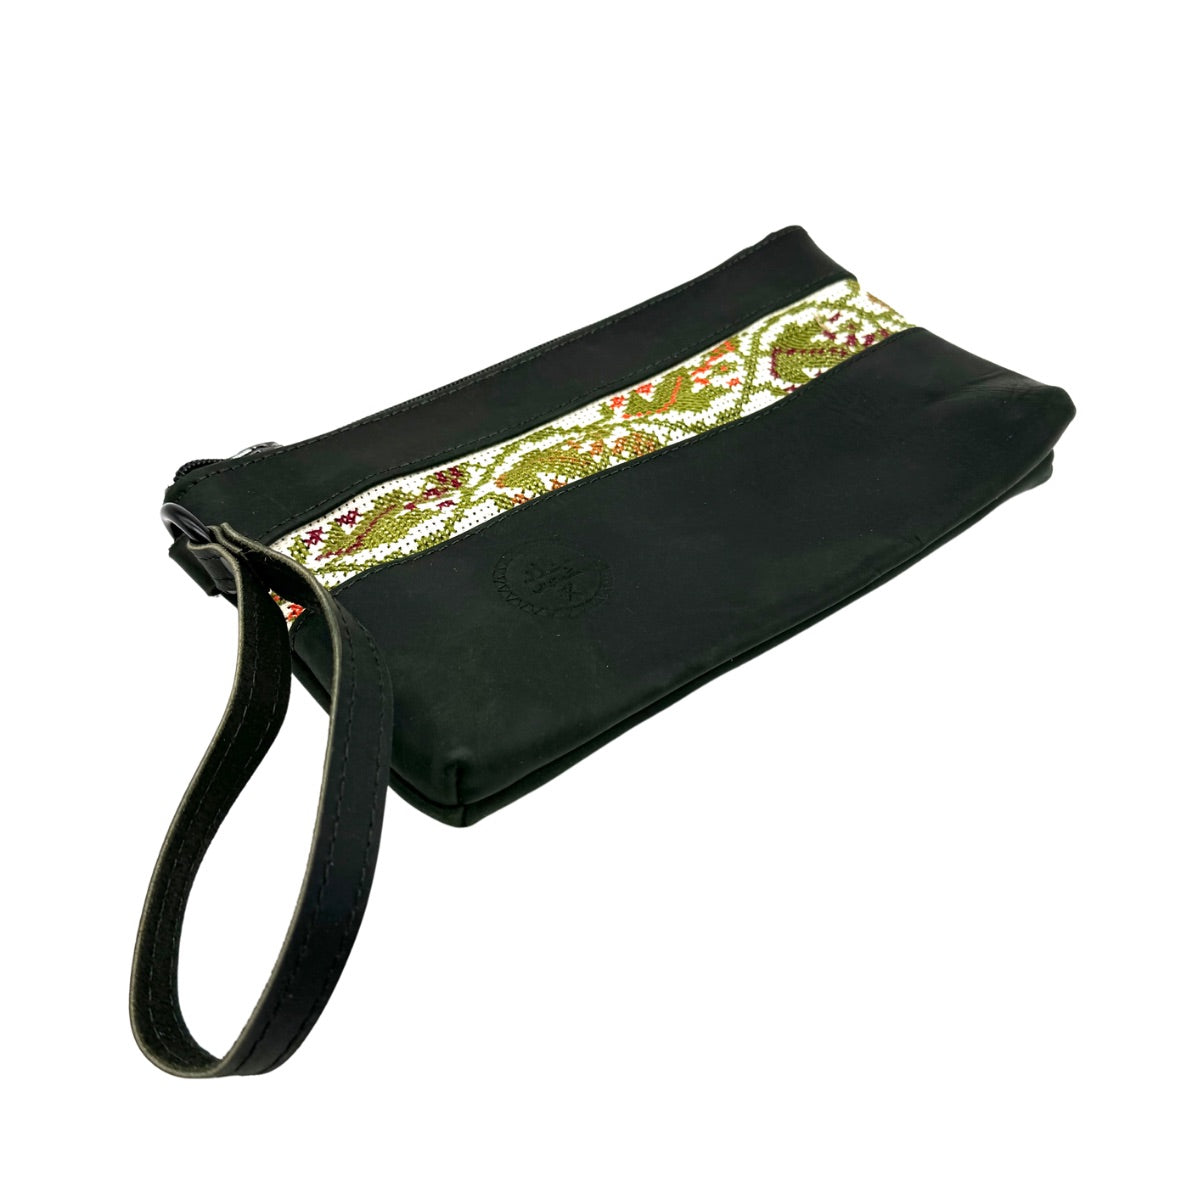 Leather Bag with Embroidery - Black Matte